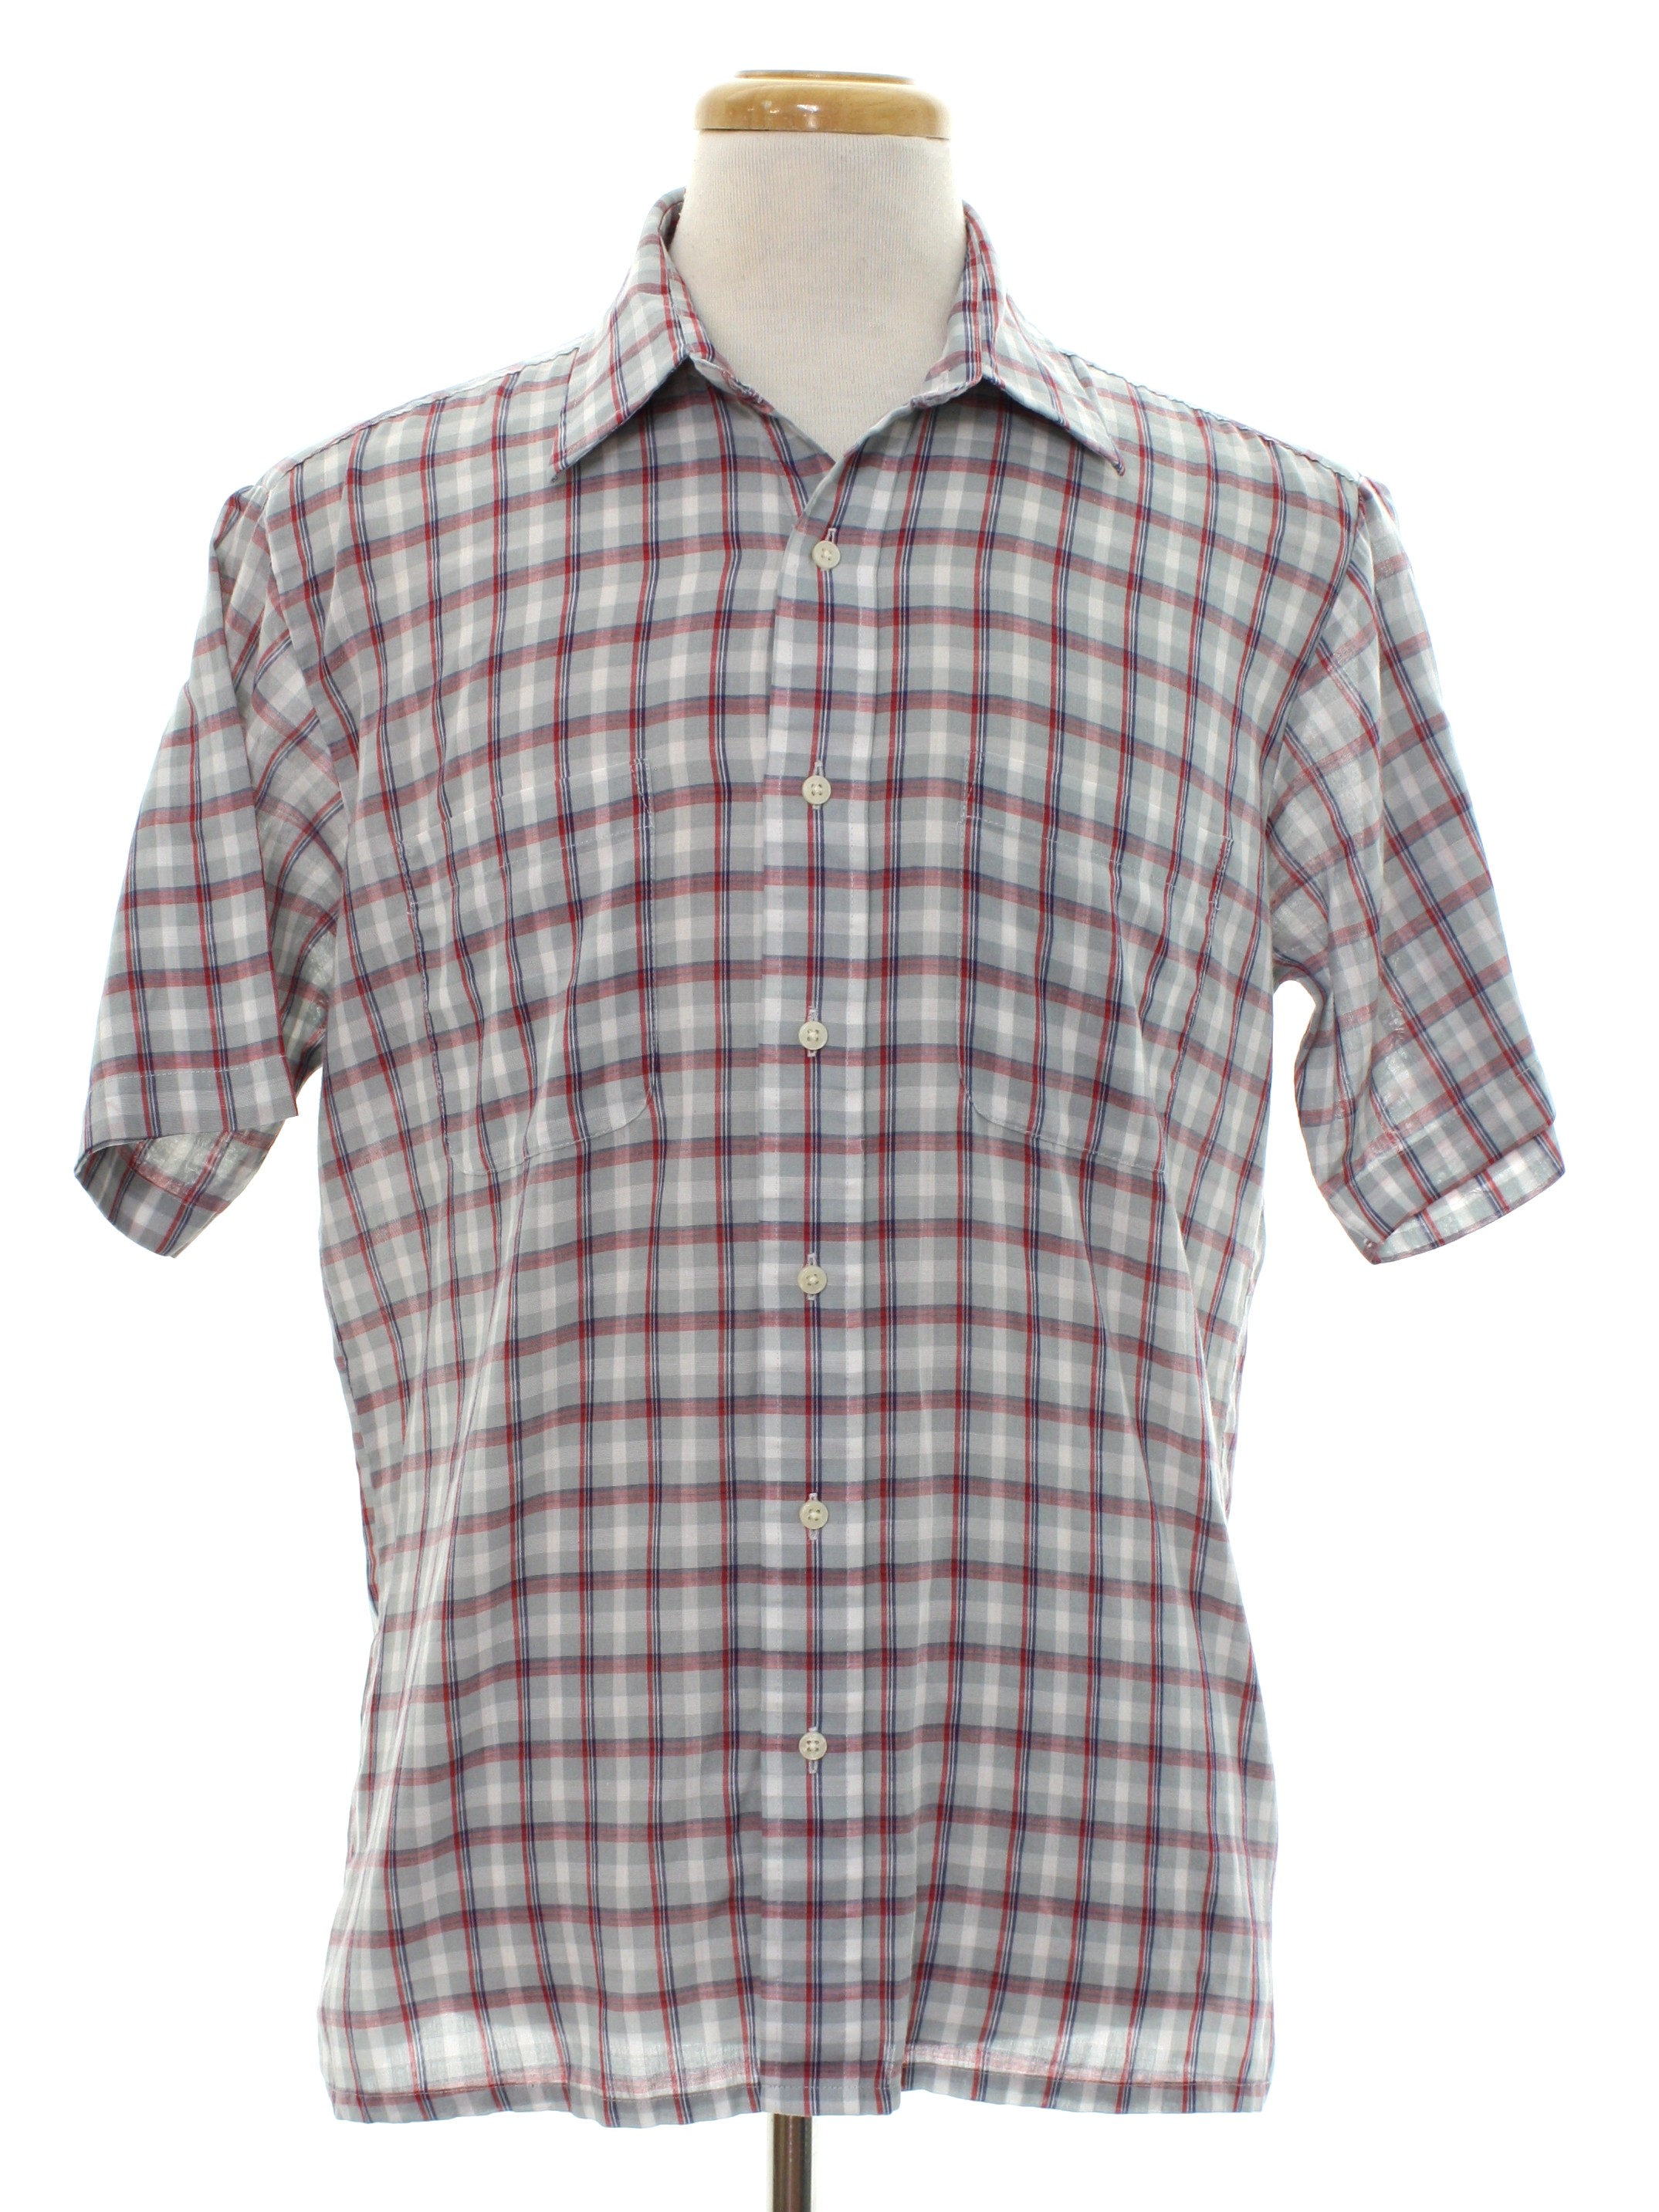 80s Retro Shirt: 80s -Towncraft- Mens grey, white, blue, and red plaid ...